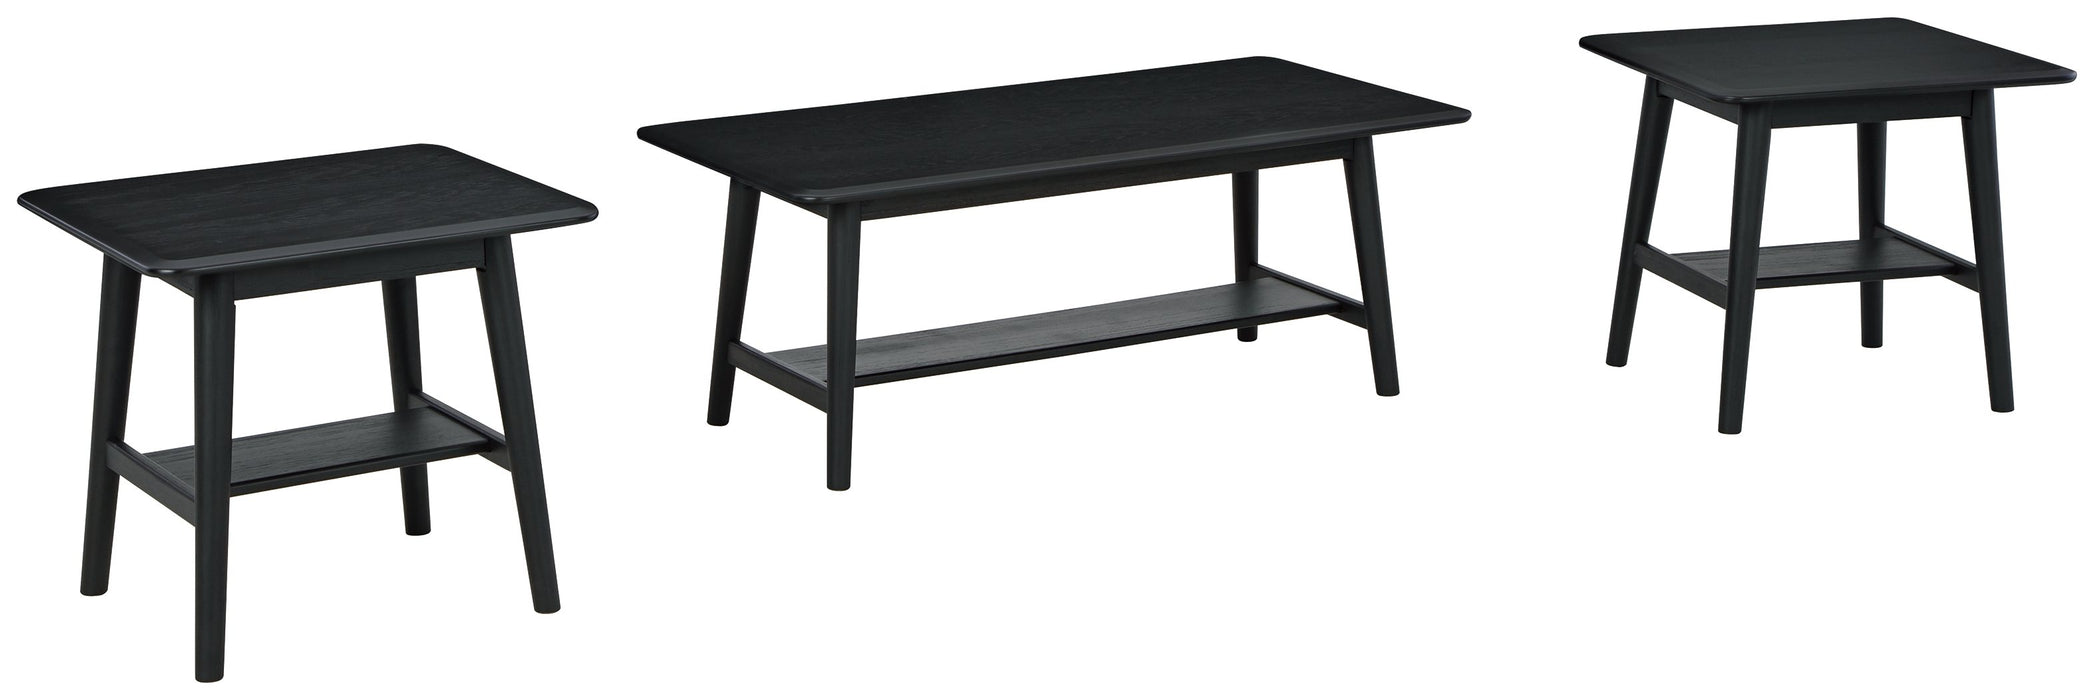 Westmoro - Black - Occasional Table Set (Set of 3)